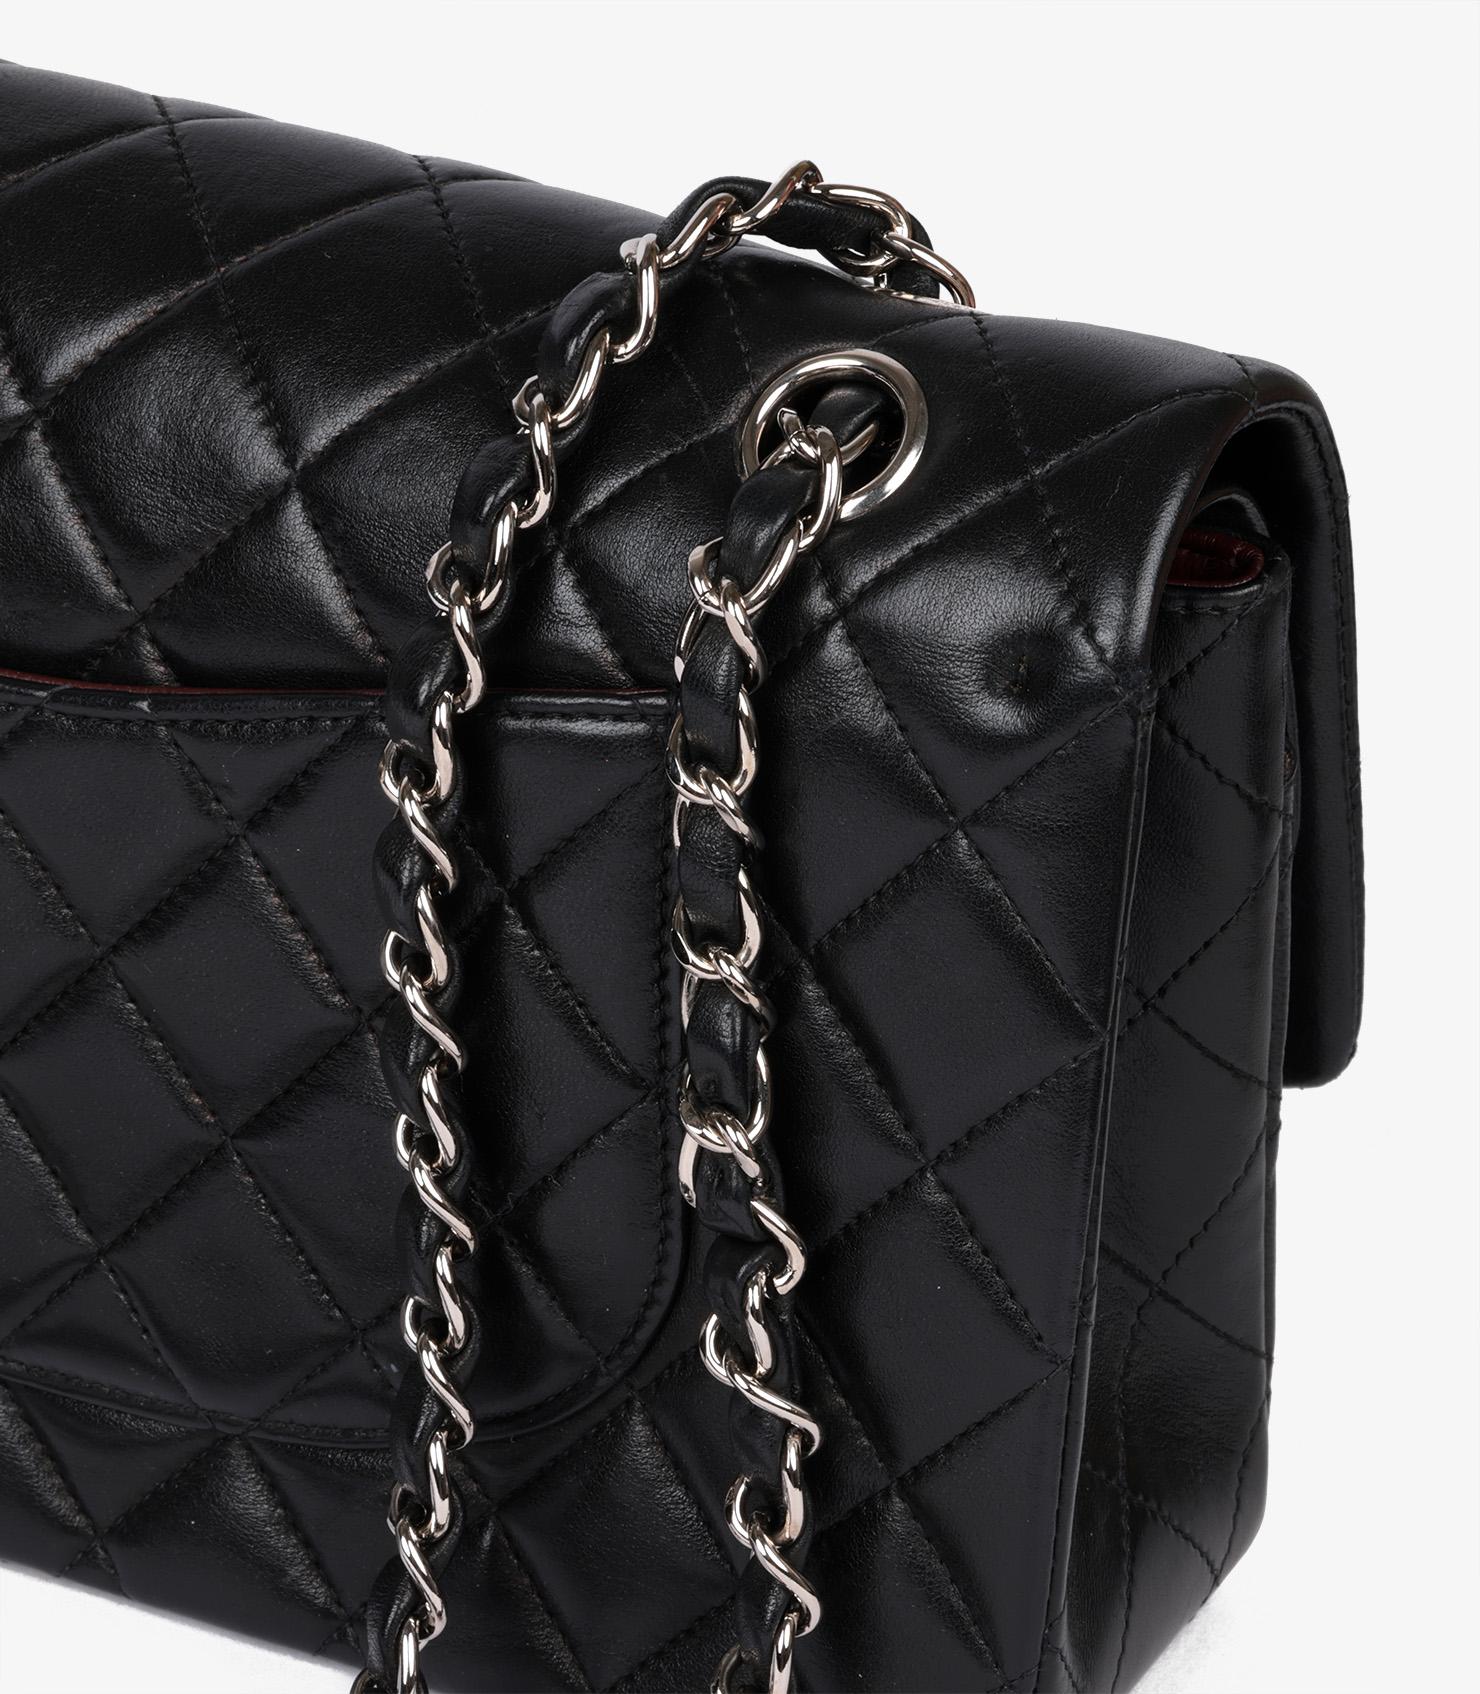 Chanel Black Quilted Lambskin Vintage Medium Classic Double Flap Bag

Brand- Chanel
Model- Medium Classic Double Flap Bag
Product Type- Shoulder
Serial Number- 57*****
Age- Circa 1997
Accompanied By- Chanel Dust Bag, Authenticity Card
Colour-